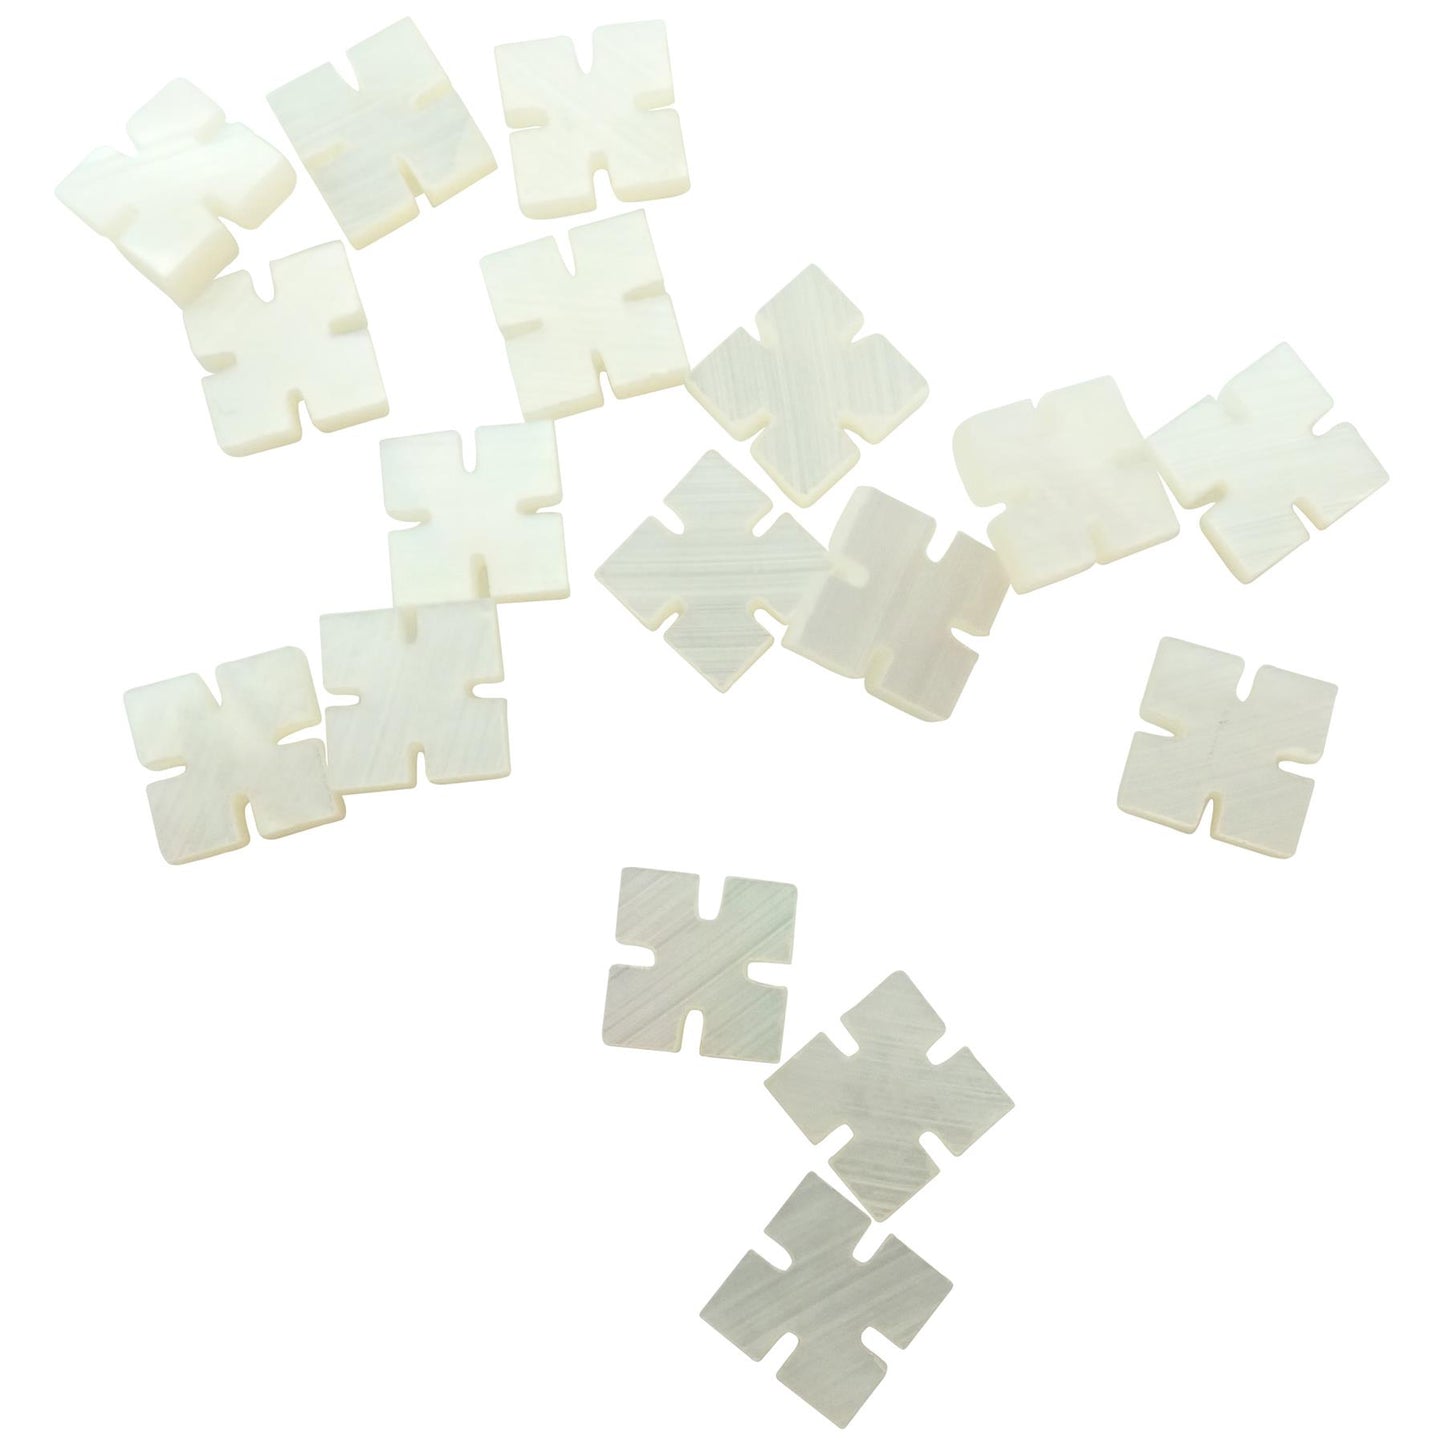 Incudo White Pearl Mother of Pearl Notched Square Inlays - 5mm (0.197"), Pack of 20